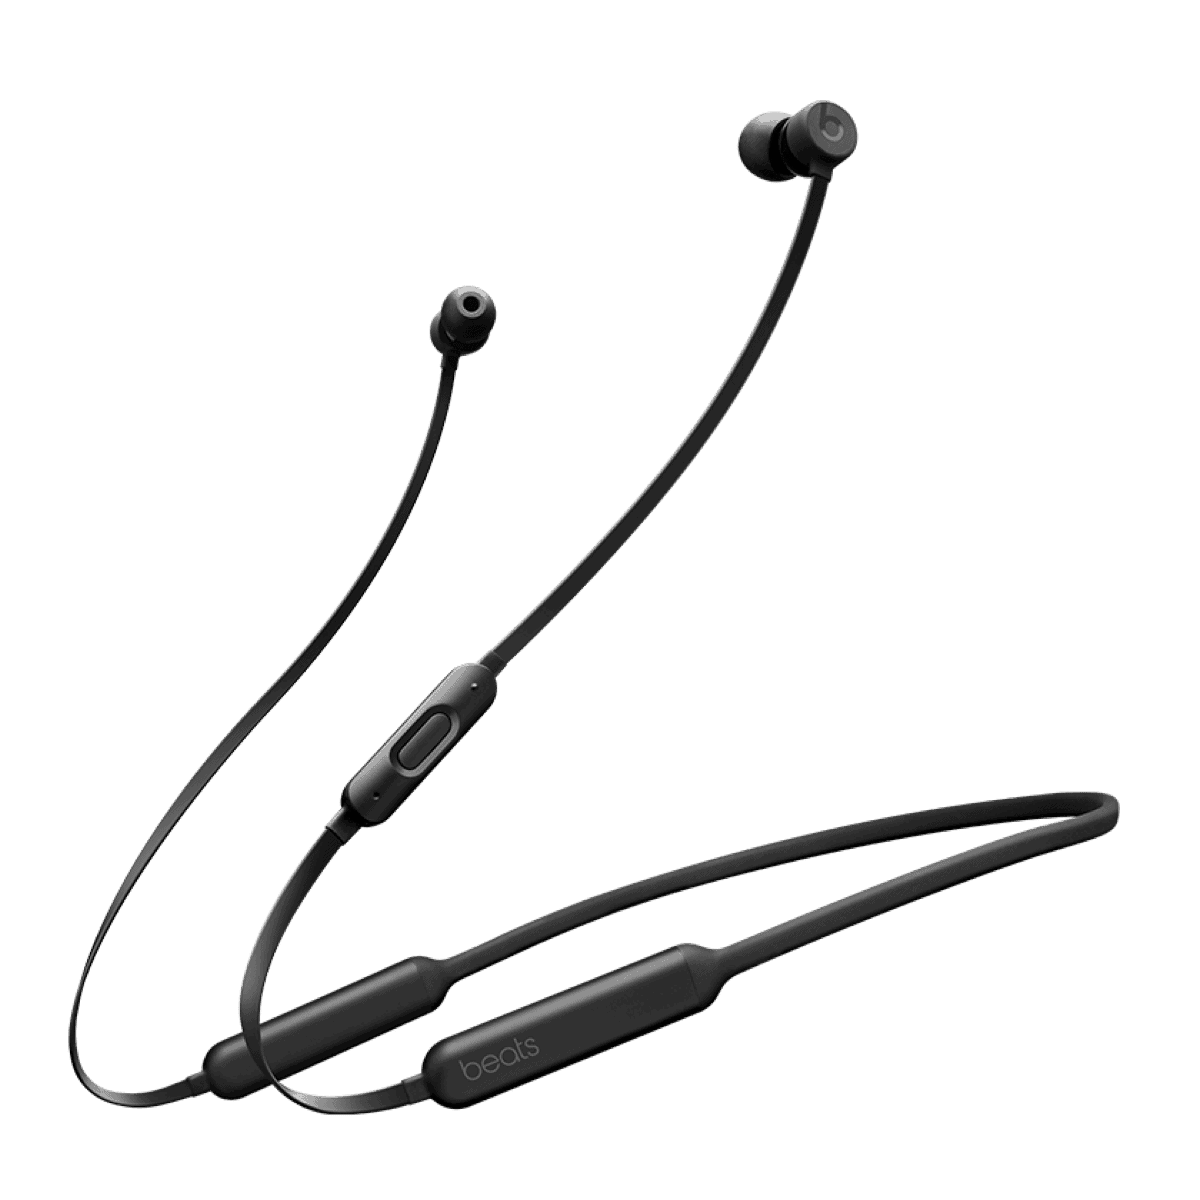 BeatsX headphones in our list of AirPods alternatives.